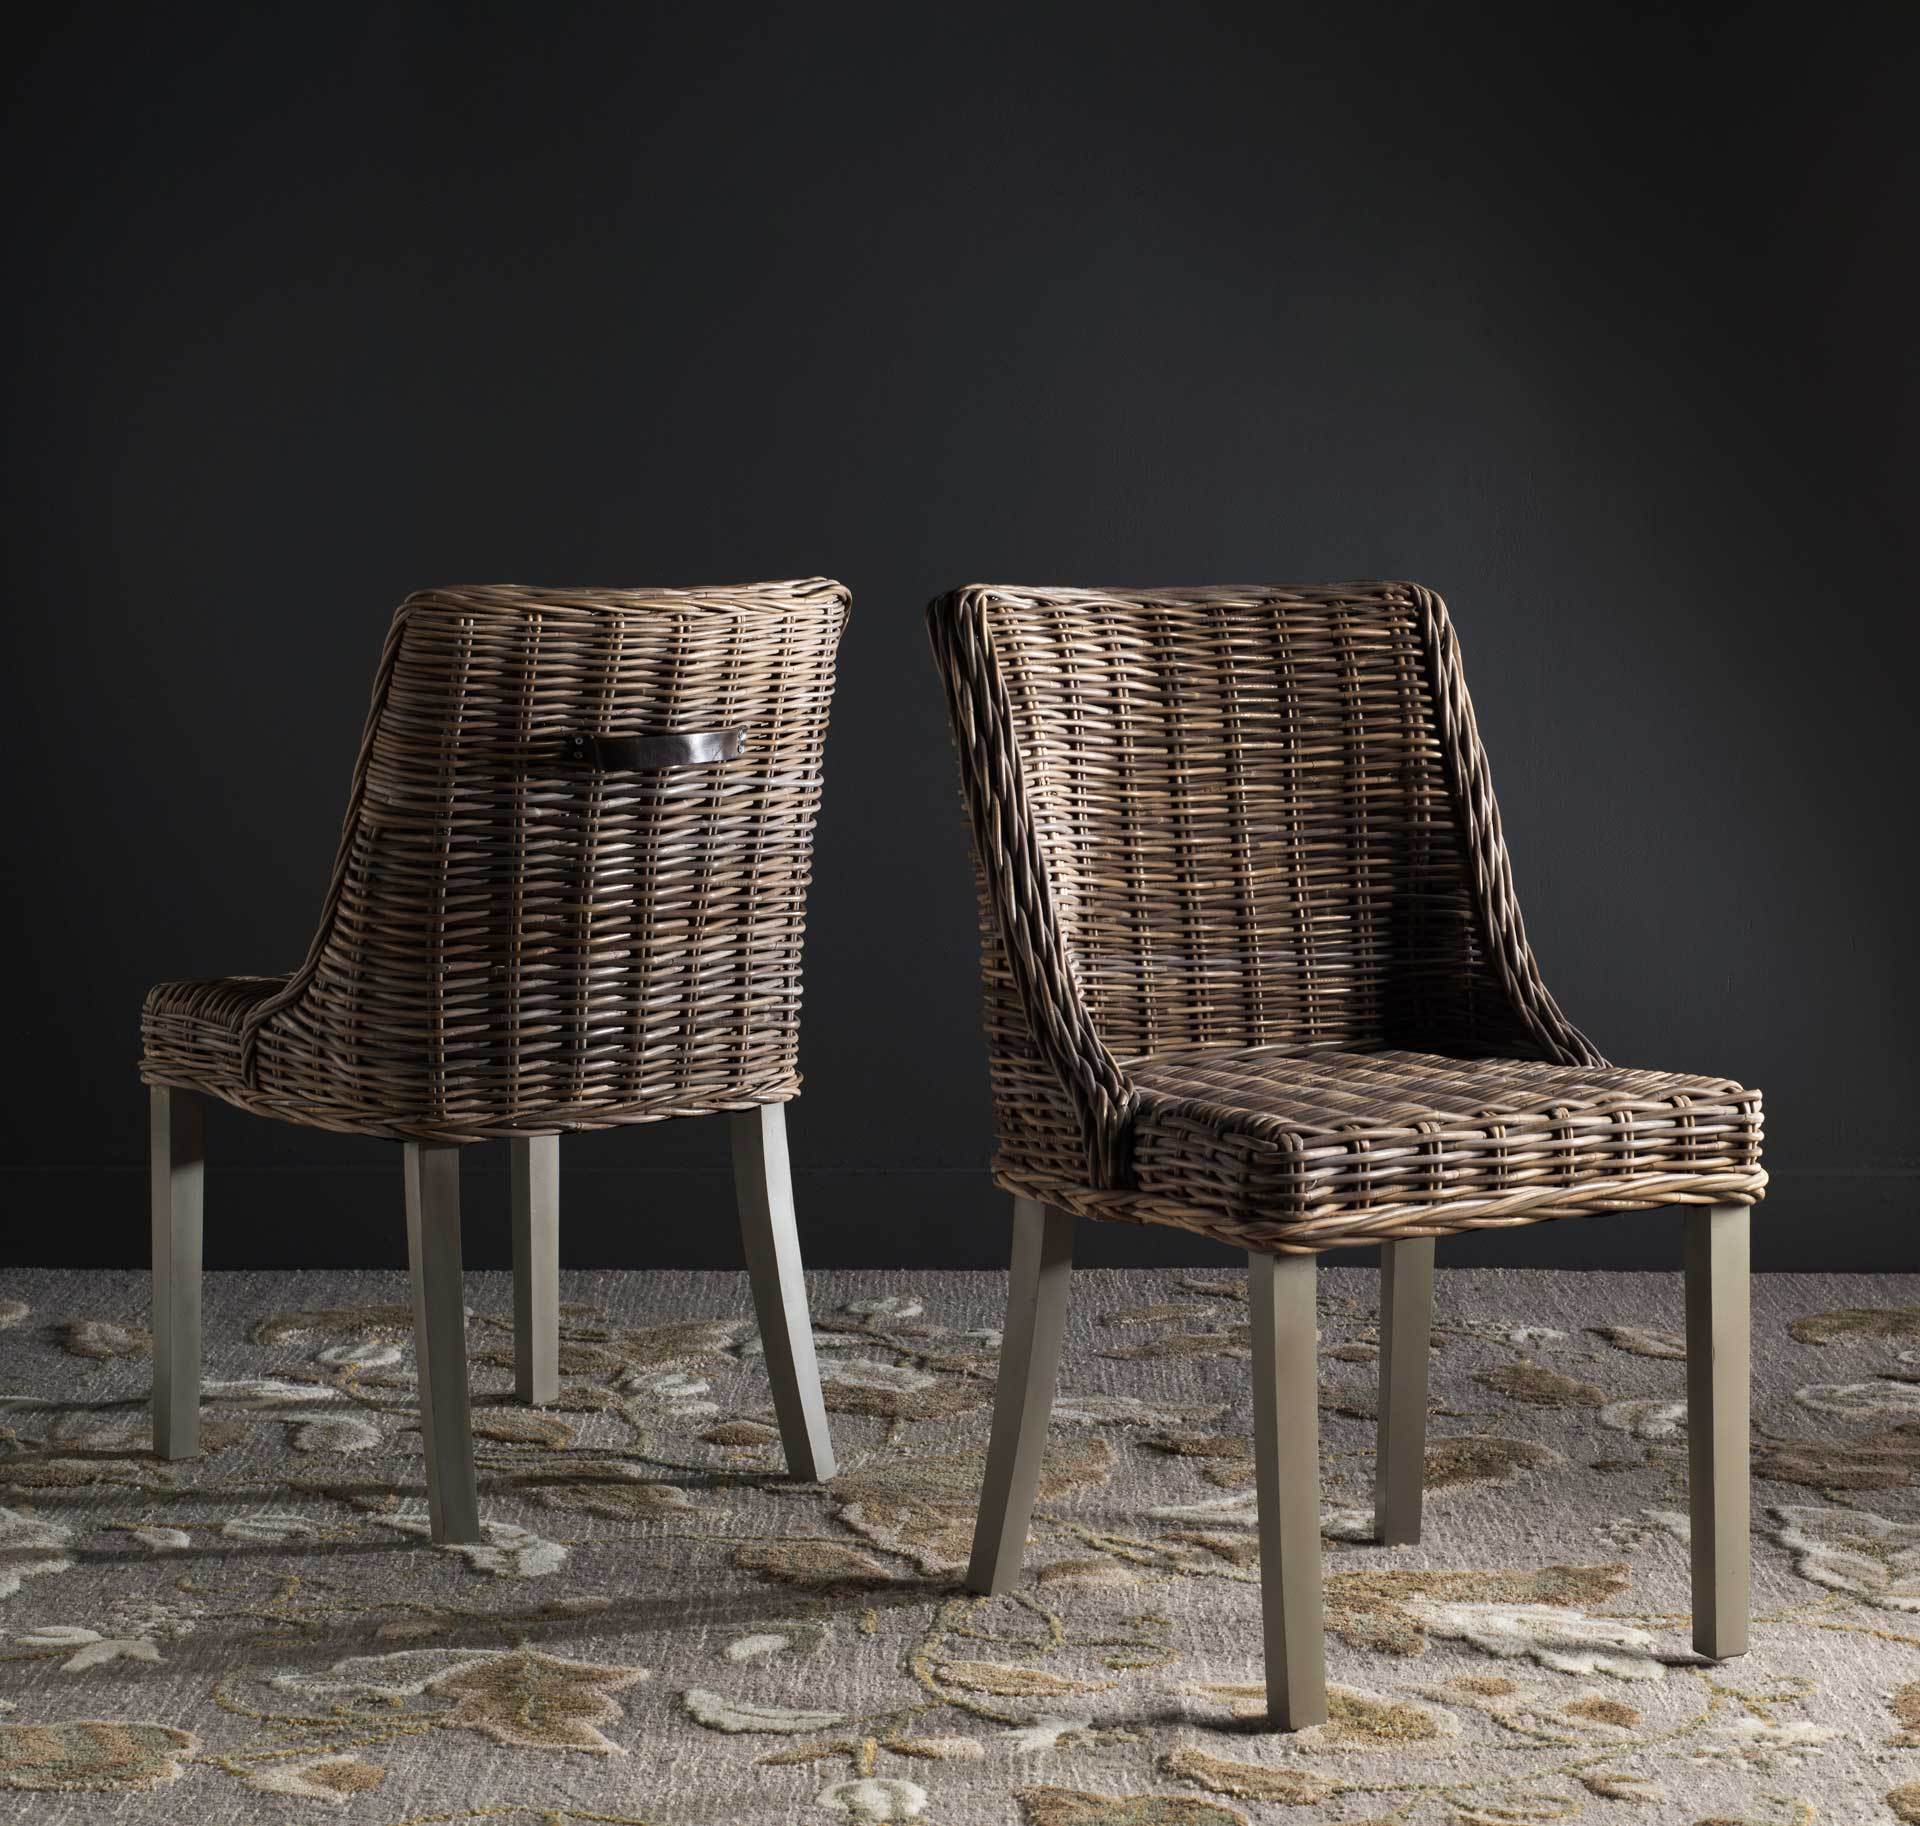 Carlos Wicker Dining Chair (Set of 2)